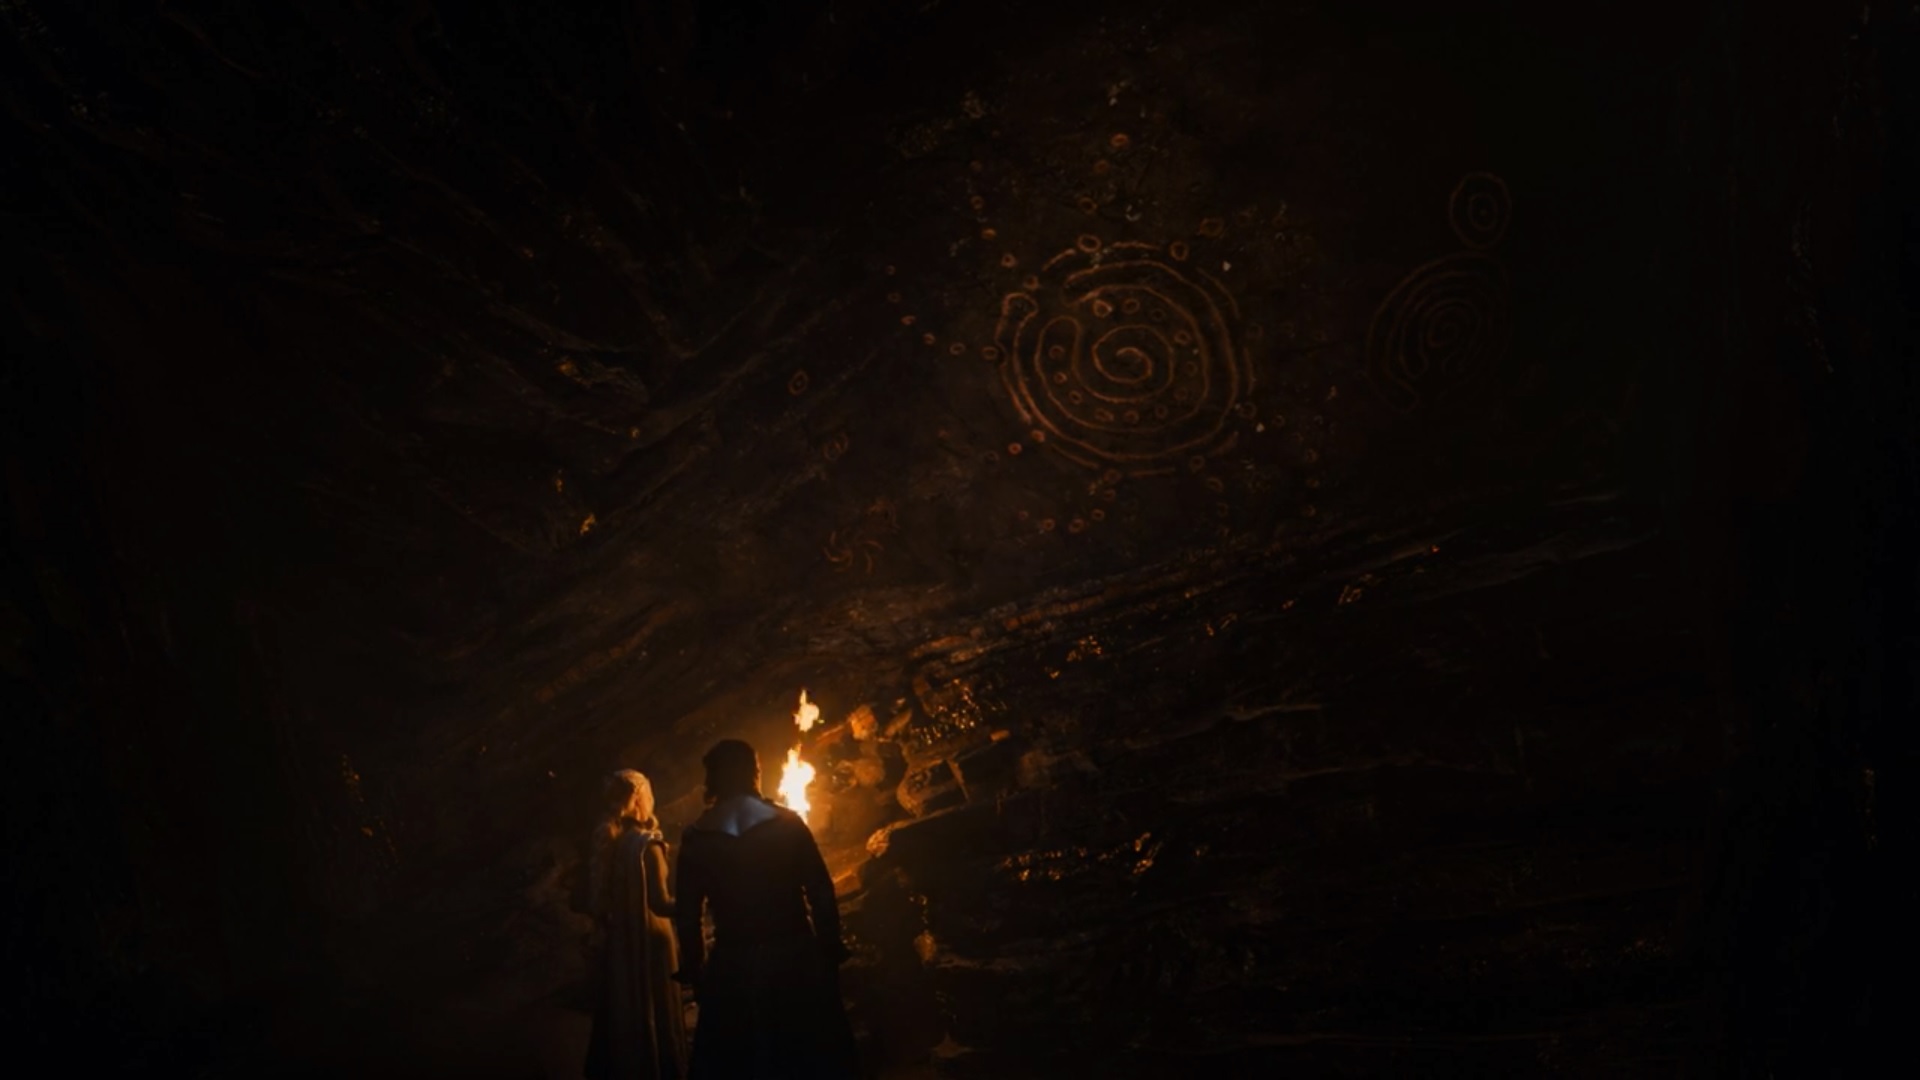 Jon Snow and Daenerys Targaryen in the caves under Dragonstone with the drawings of the Children of the Forest